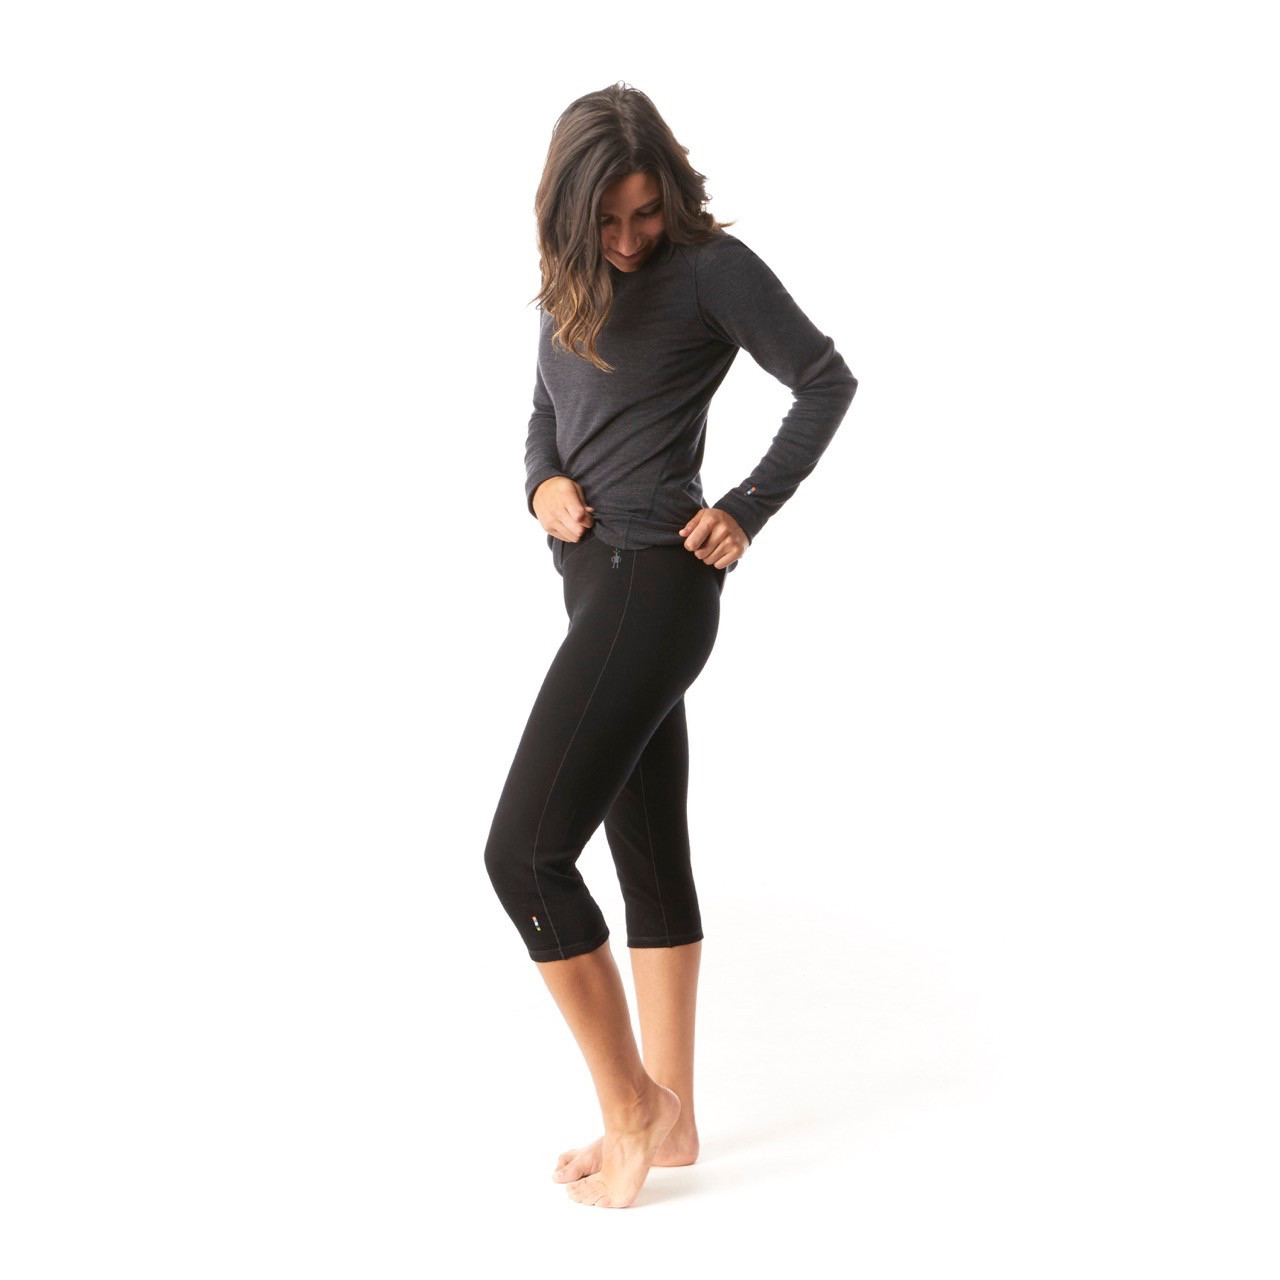 Merino Wool Blend Baselayer Tights by Kombi – Adventure Outfitters